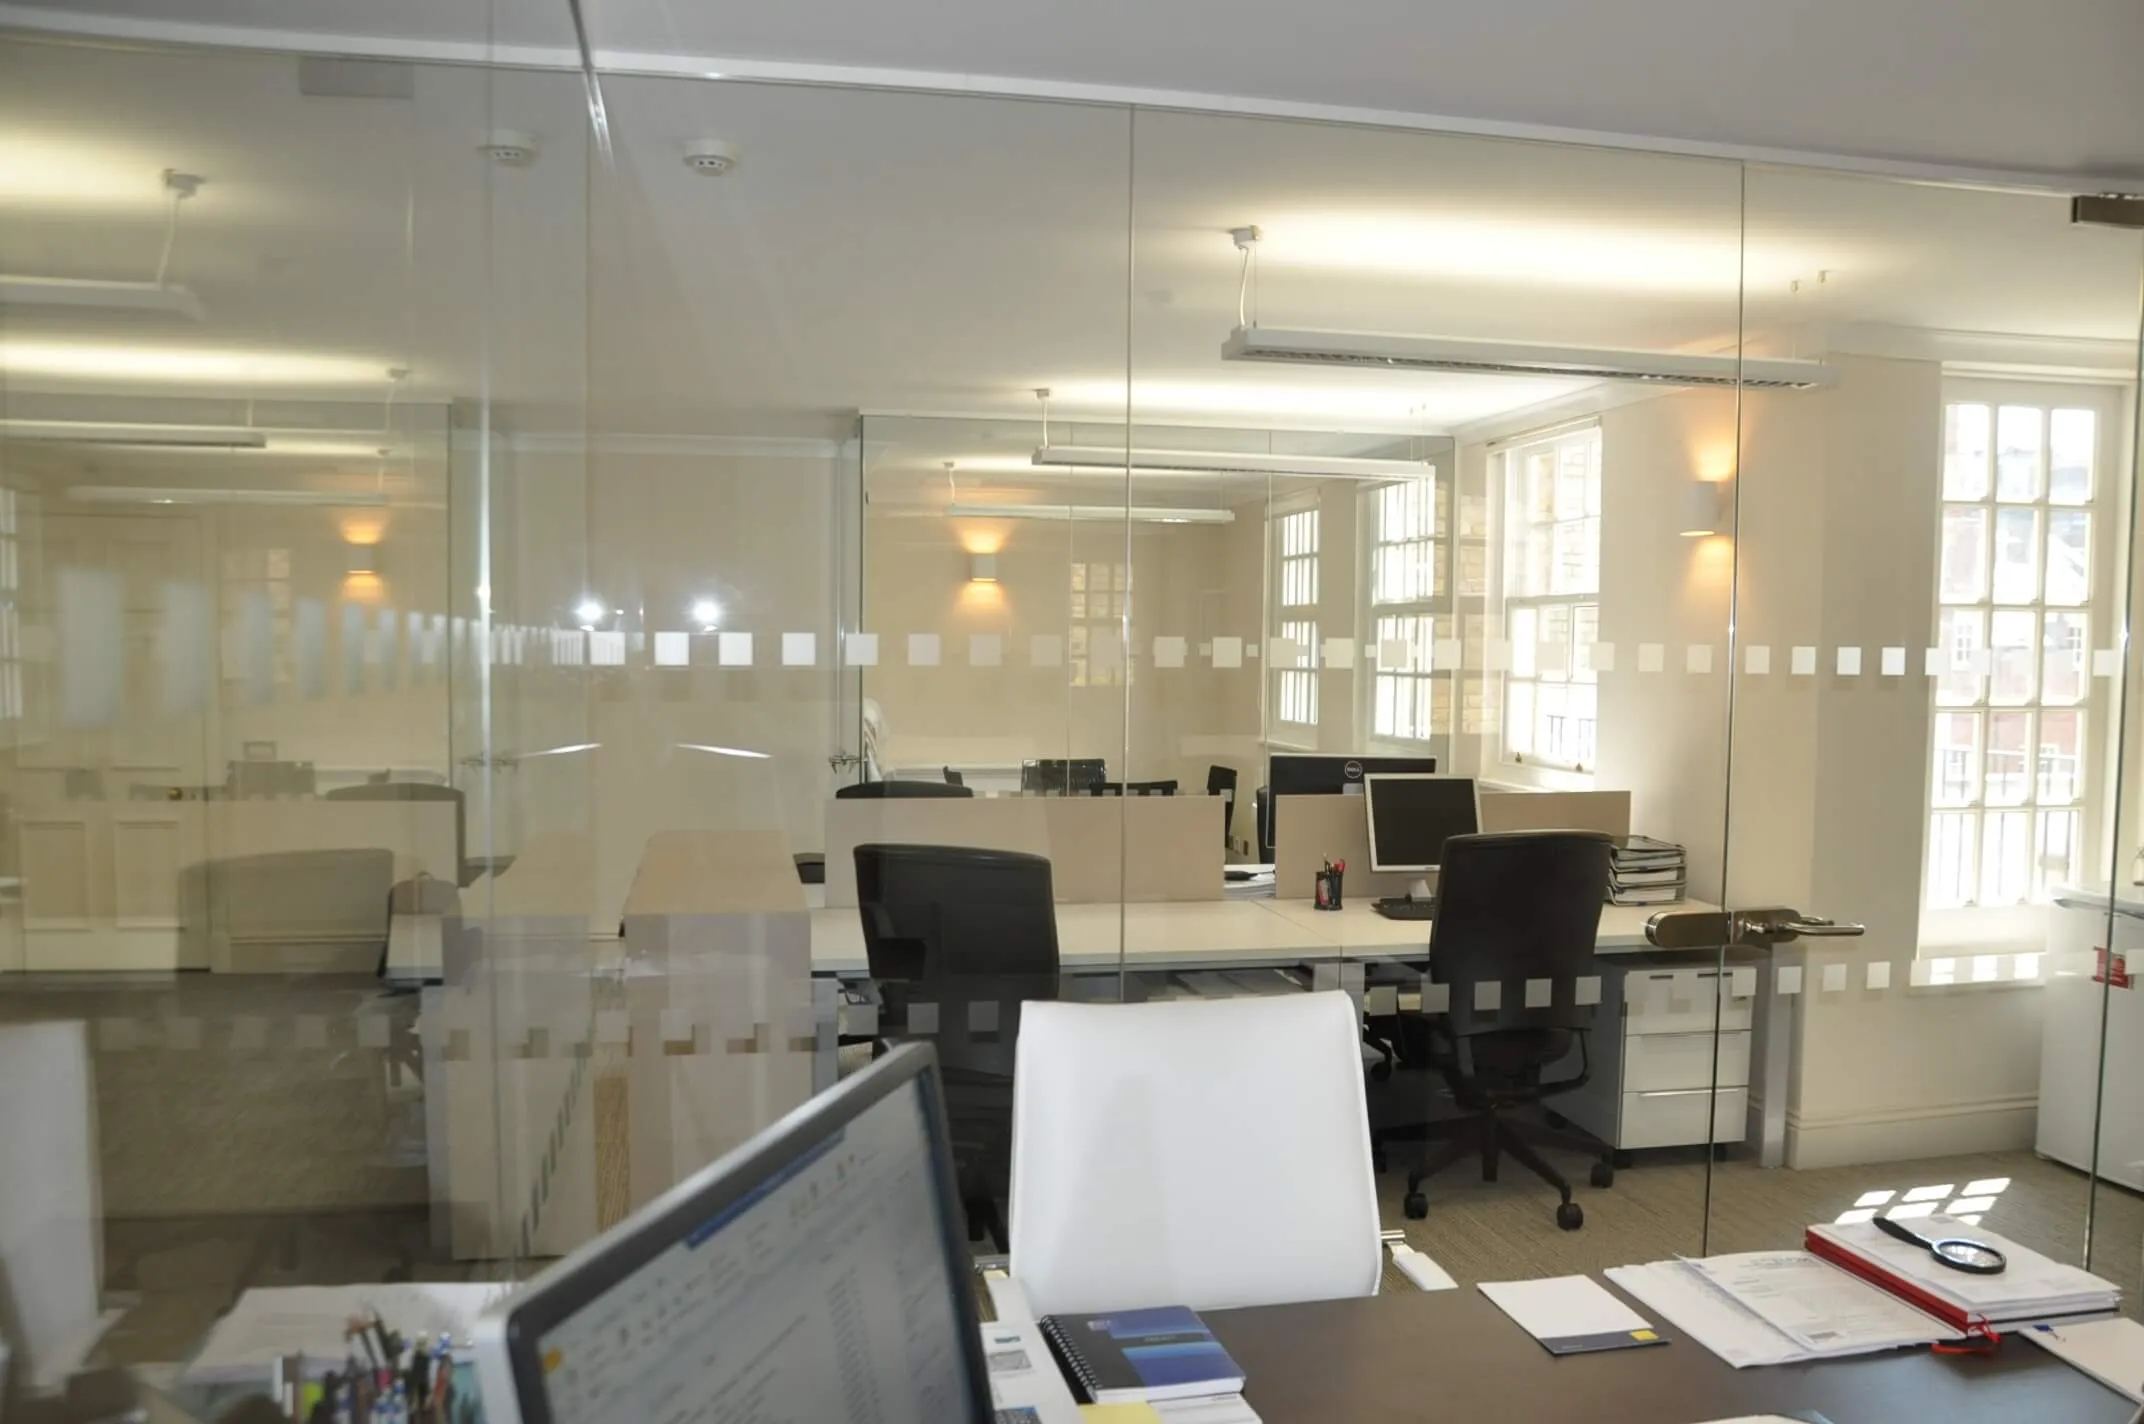 Office work and private area divided with glass walls